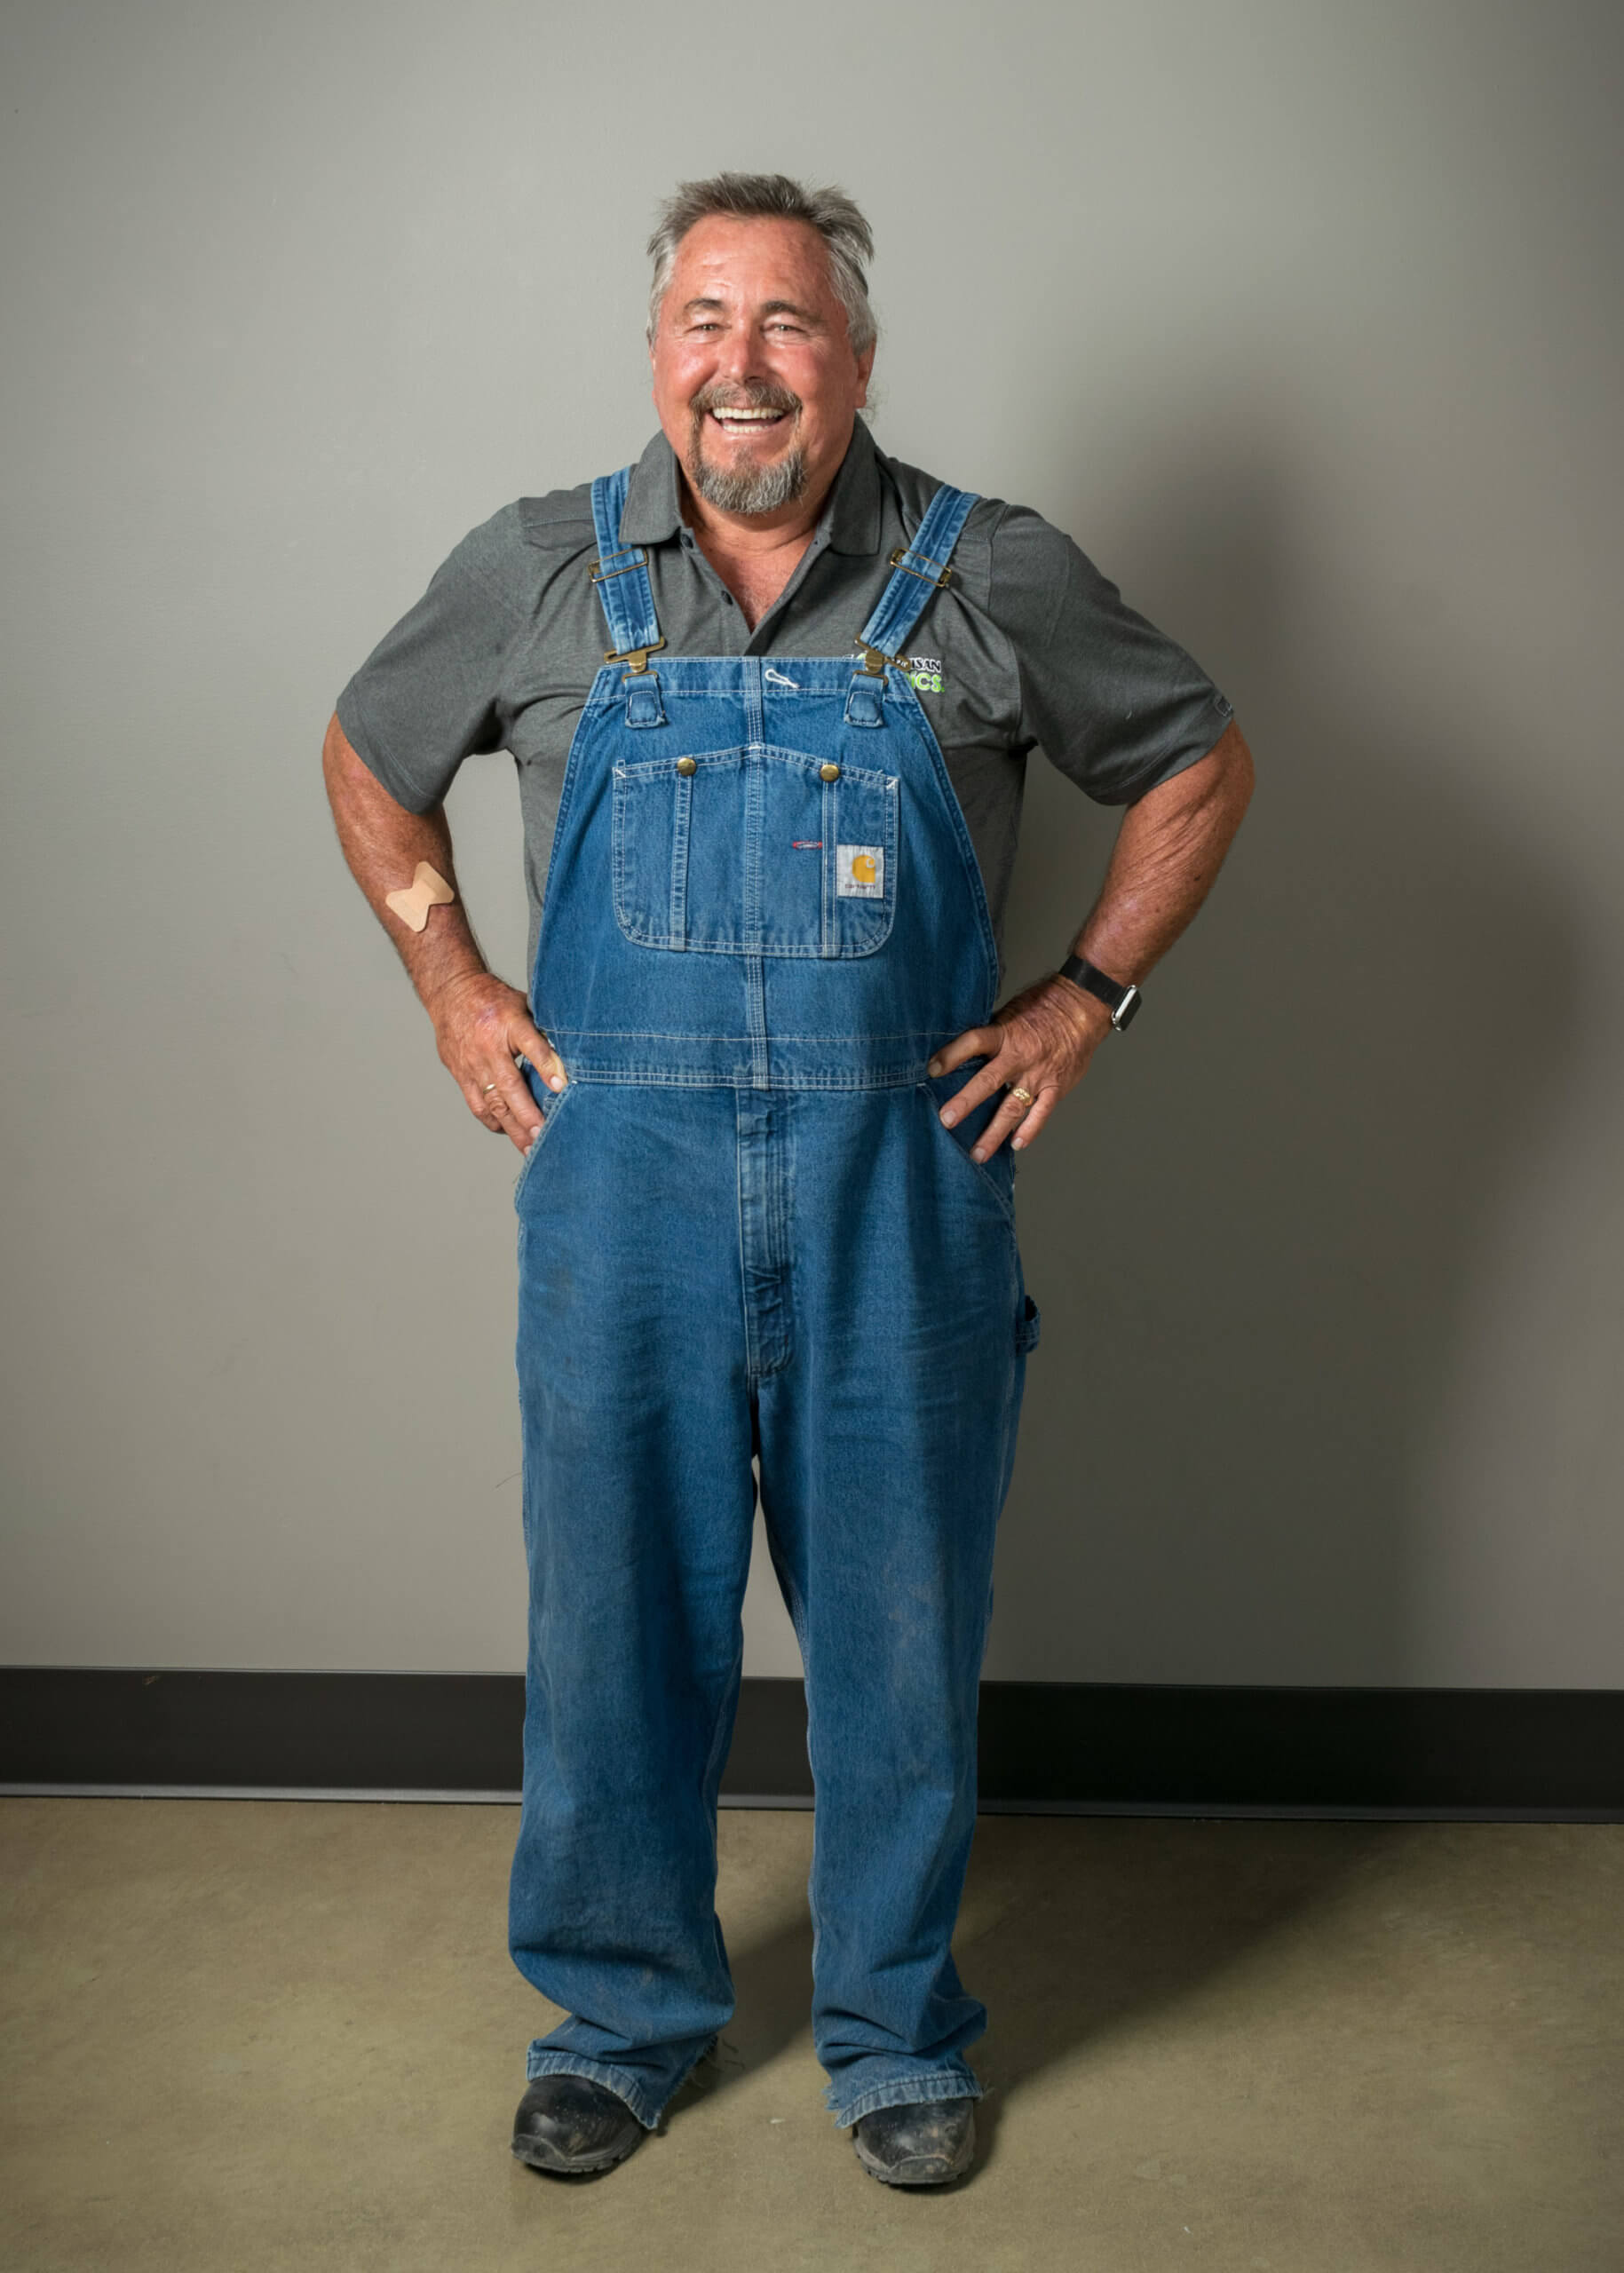 Kyle in his overalls